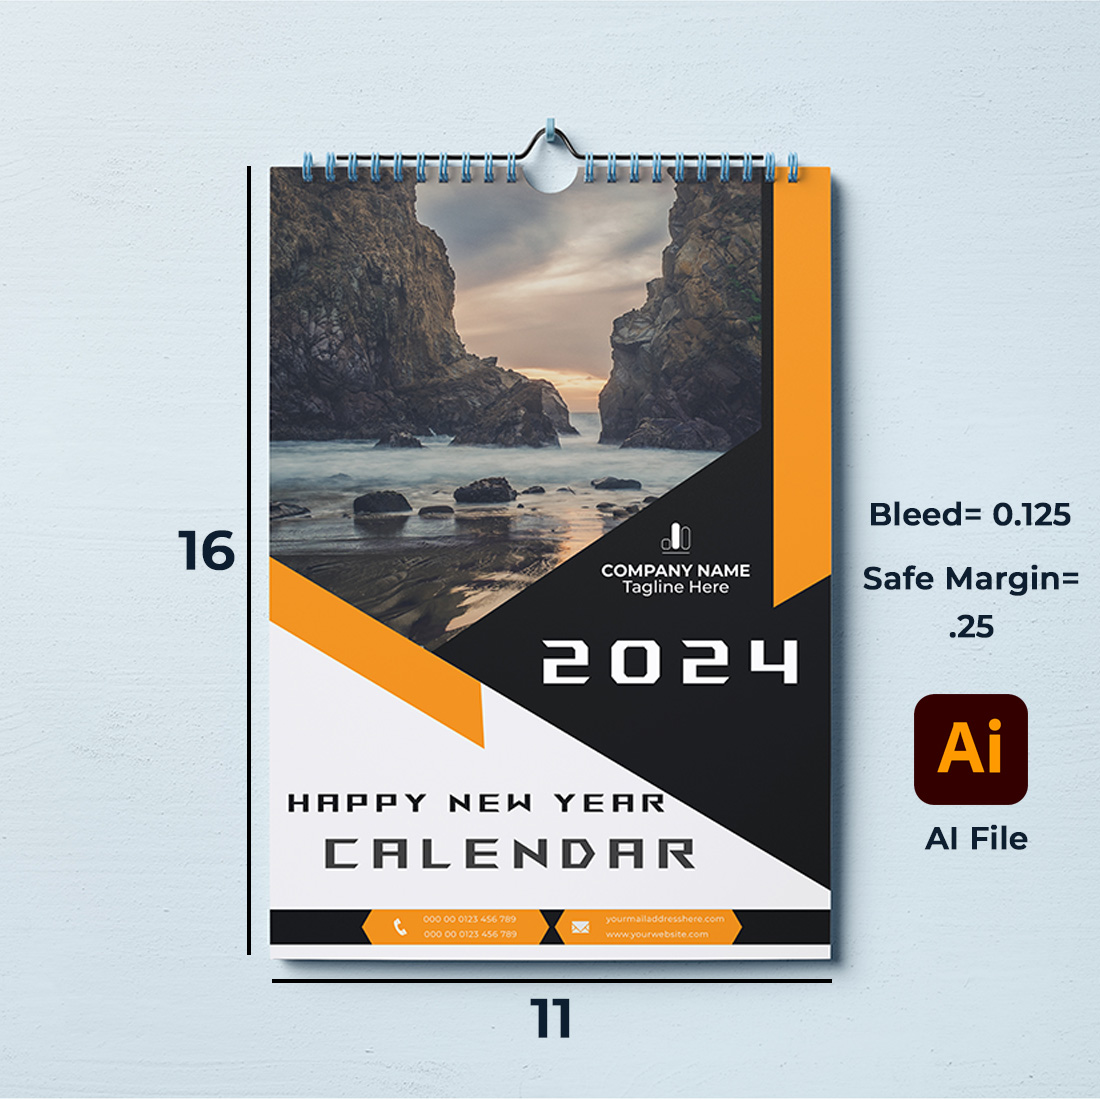 Wall Calendar 2024 template cover image.